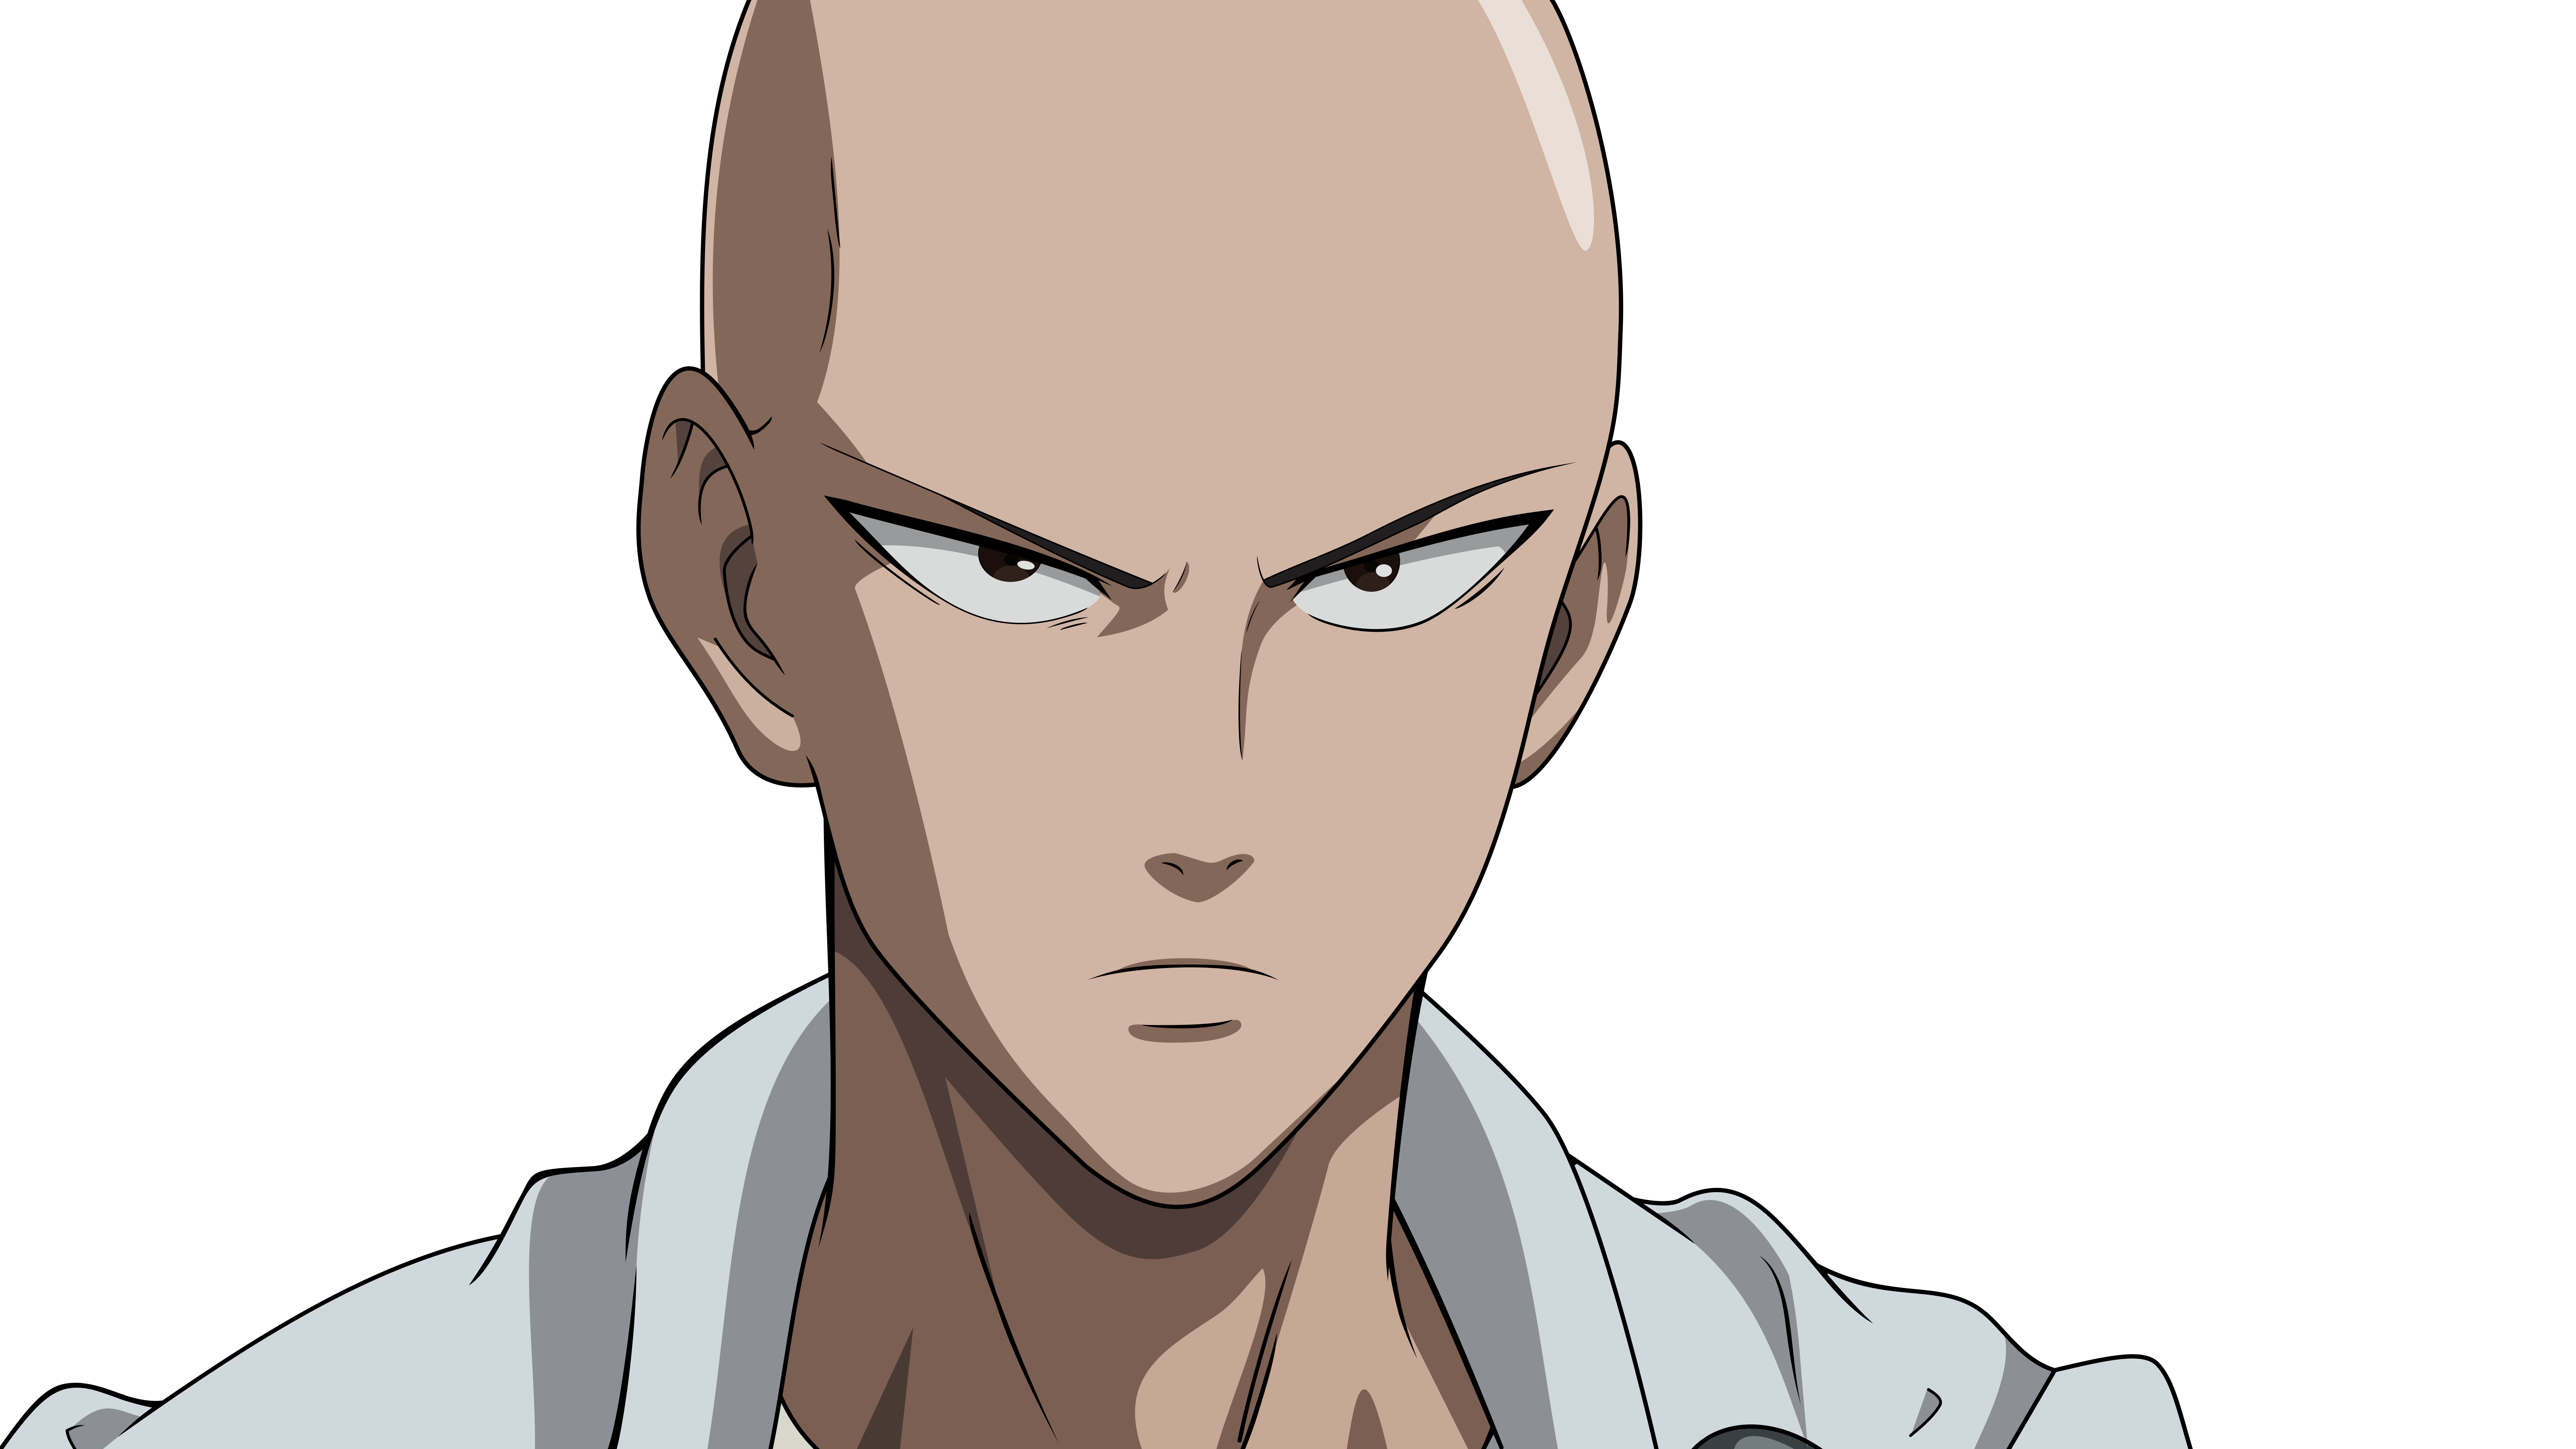 3. "Saitama" from One Punch Man - wide 6